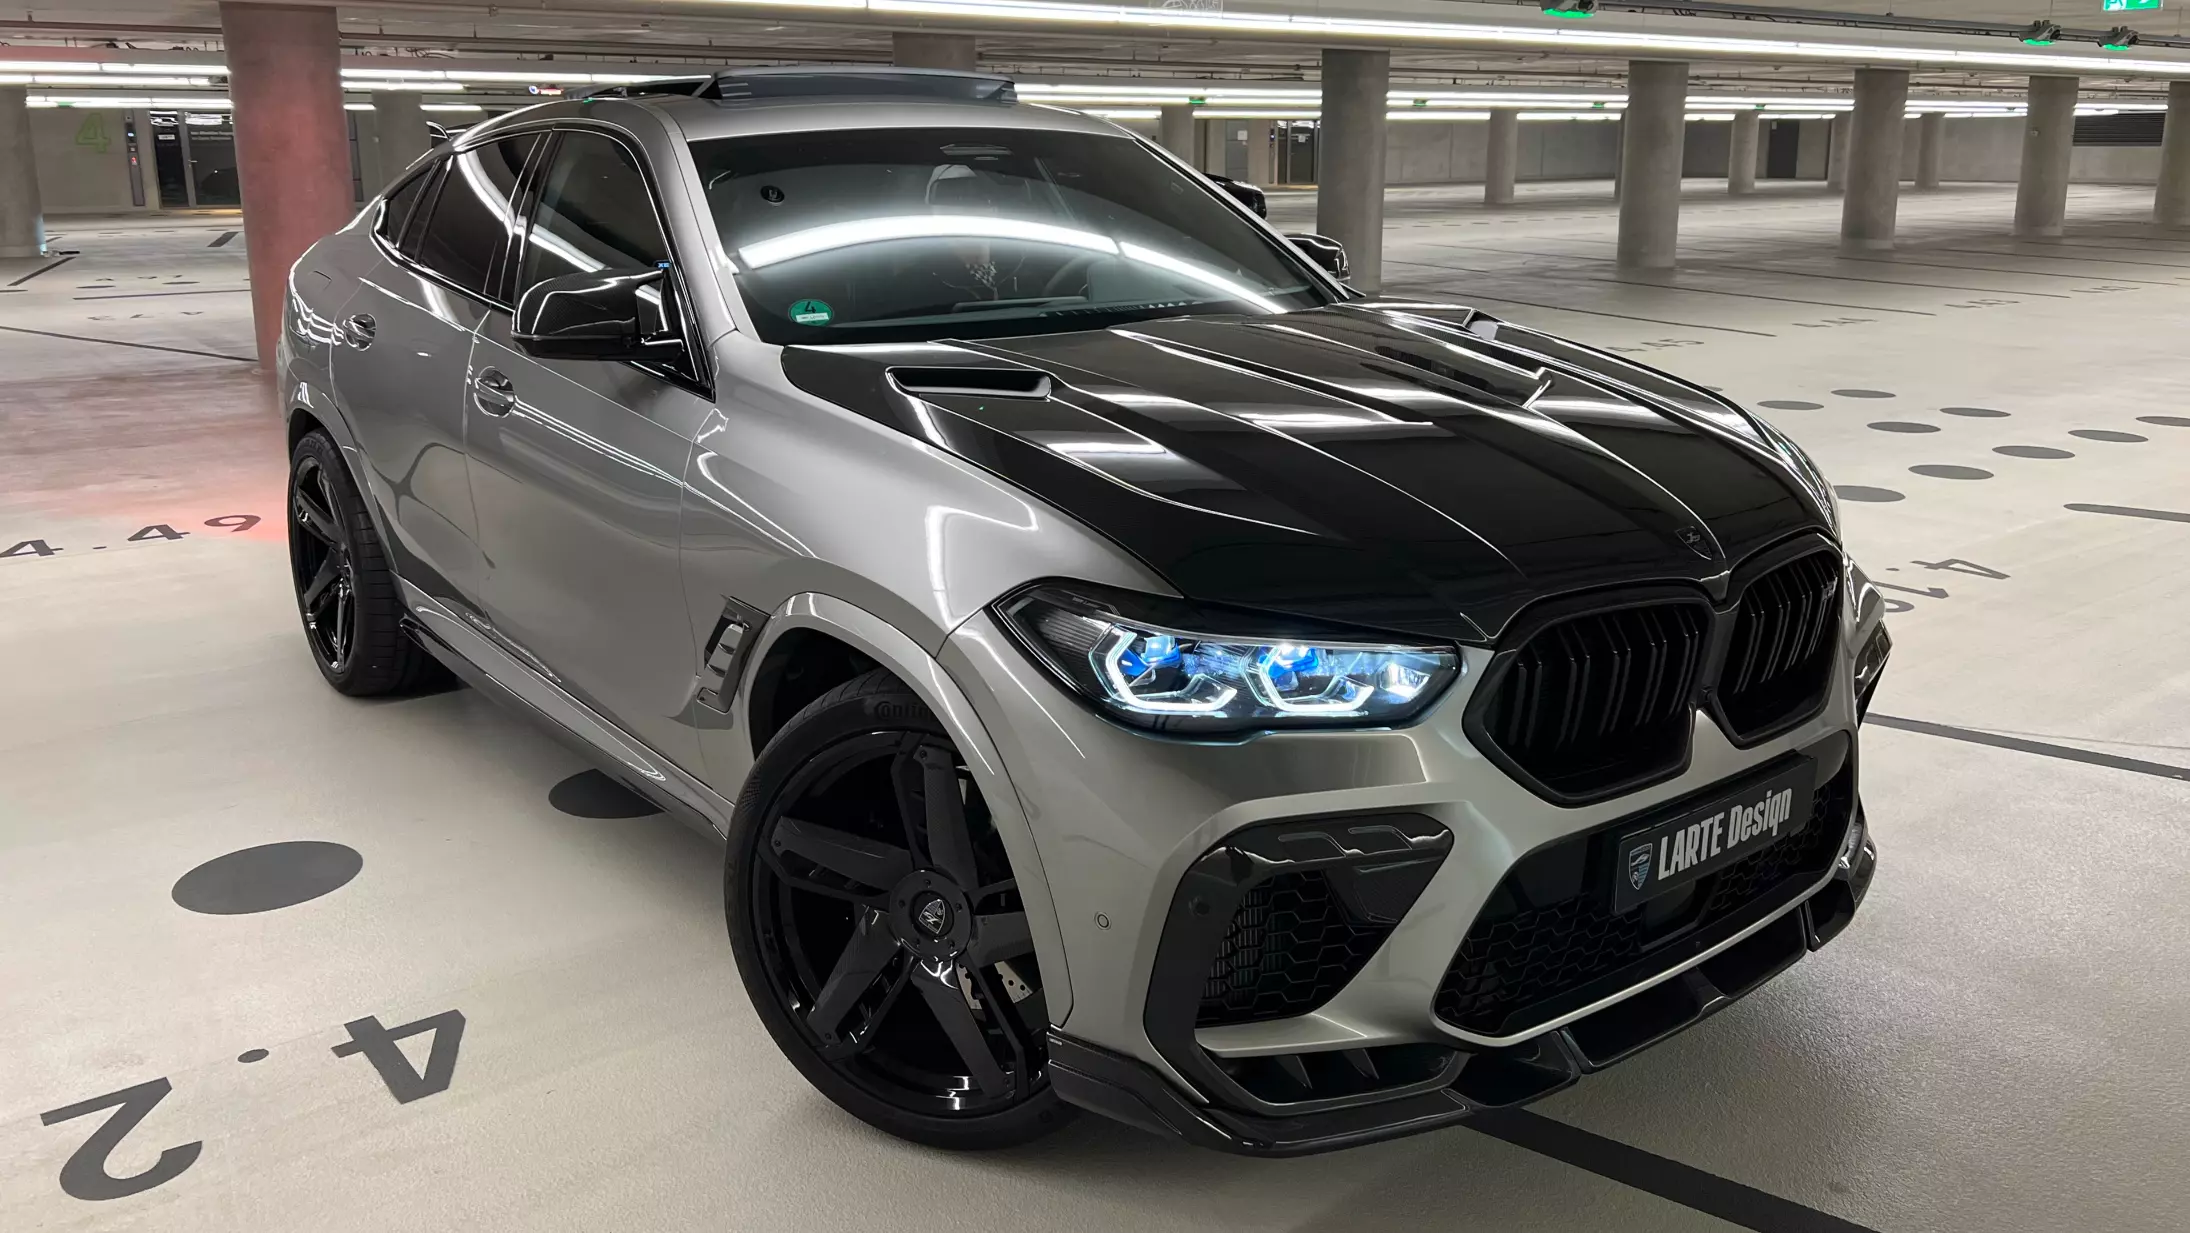 Front angle view on a BMW X6M with a body kit giving the car a custom appearance